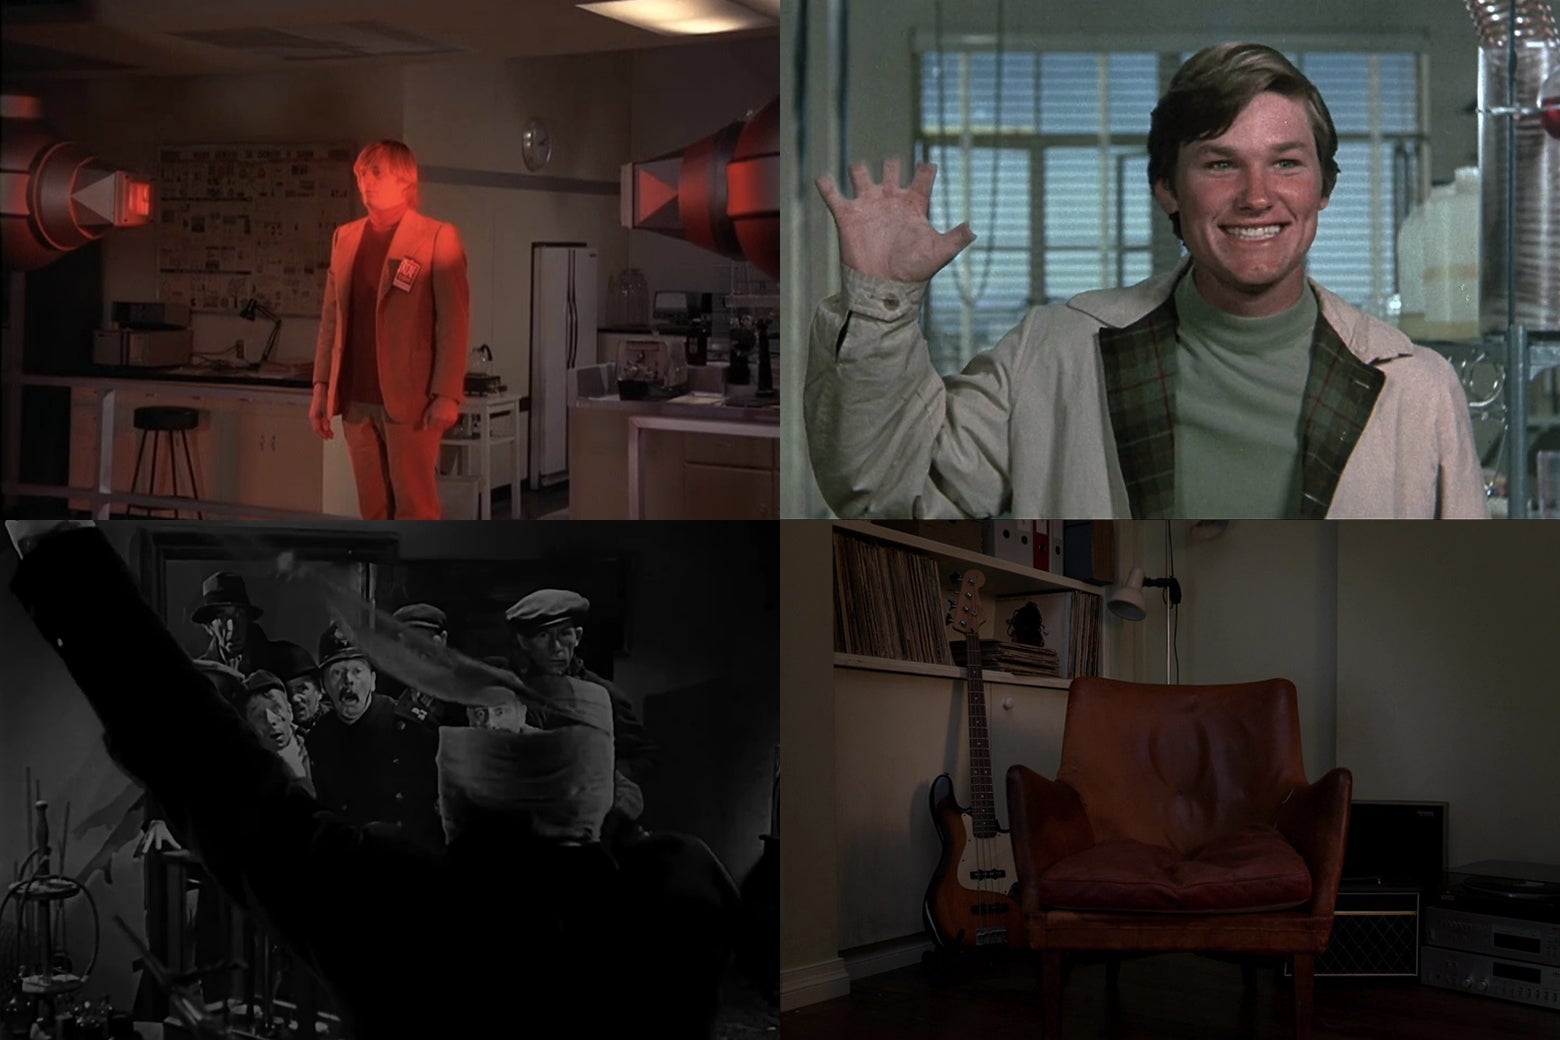 Four stills from various films and tv shows about invisibility. One, from The Invisible Man, shows a man in a tan 1970s suit bathed in red light from an apparatus. One shows Claude Rains as the original Invisible Man, horrifyng the townspeople. One shows a very young Kurt Russel holding up a hand with invisible fingers, and the last is from Universal's new film of The Invisible Man, and it shows a red leather chair with the indentations from an invisible man sitting on it.